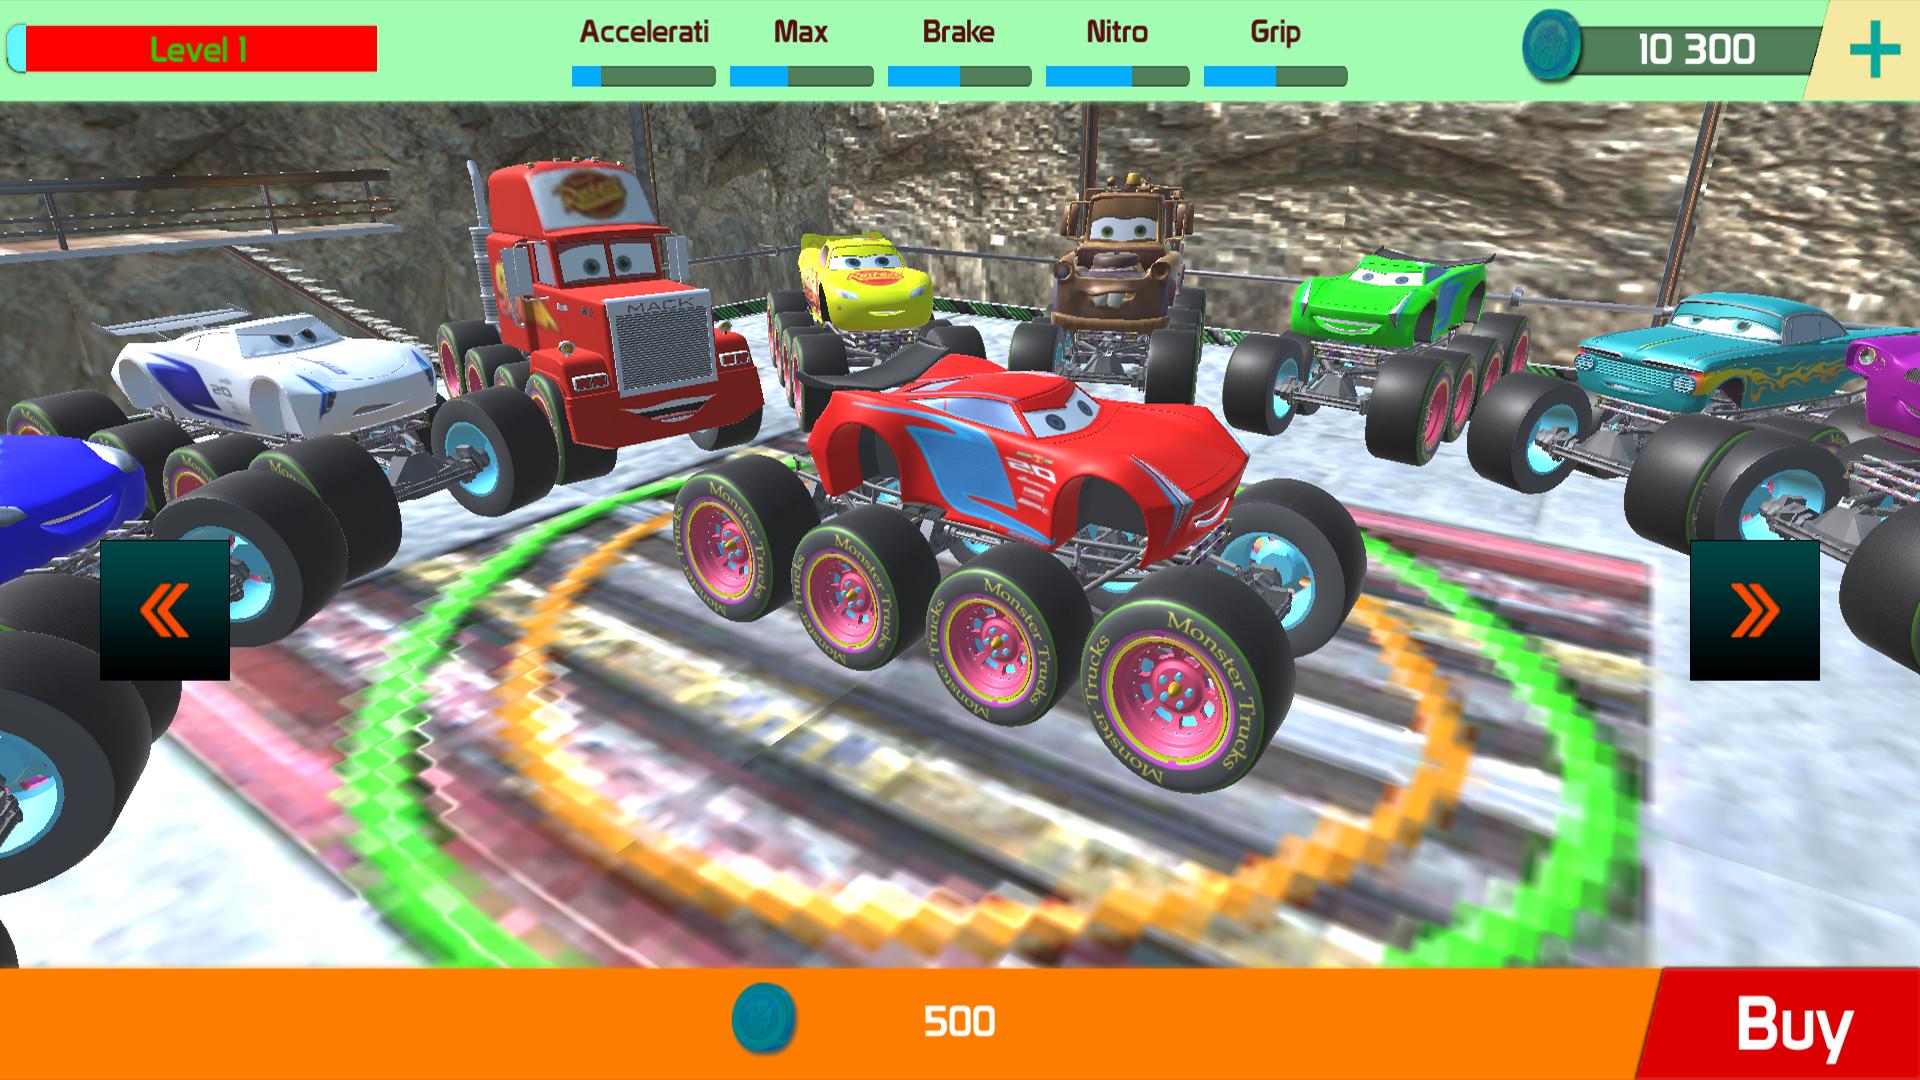 Mcqueen Monster Truck Cars 3 Racing Hero Fabulous For Android Apk Download - cars 3 racing roblox